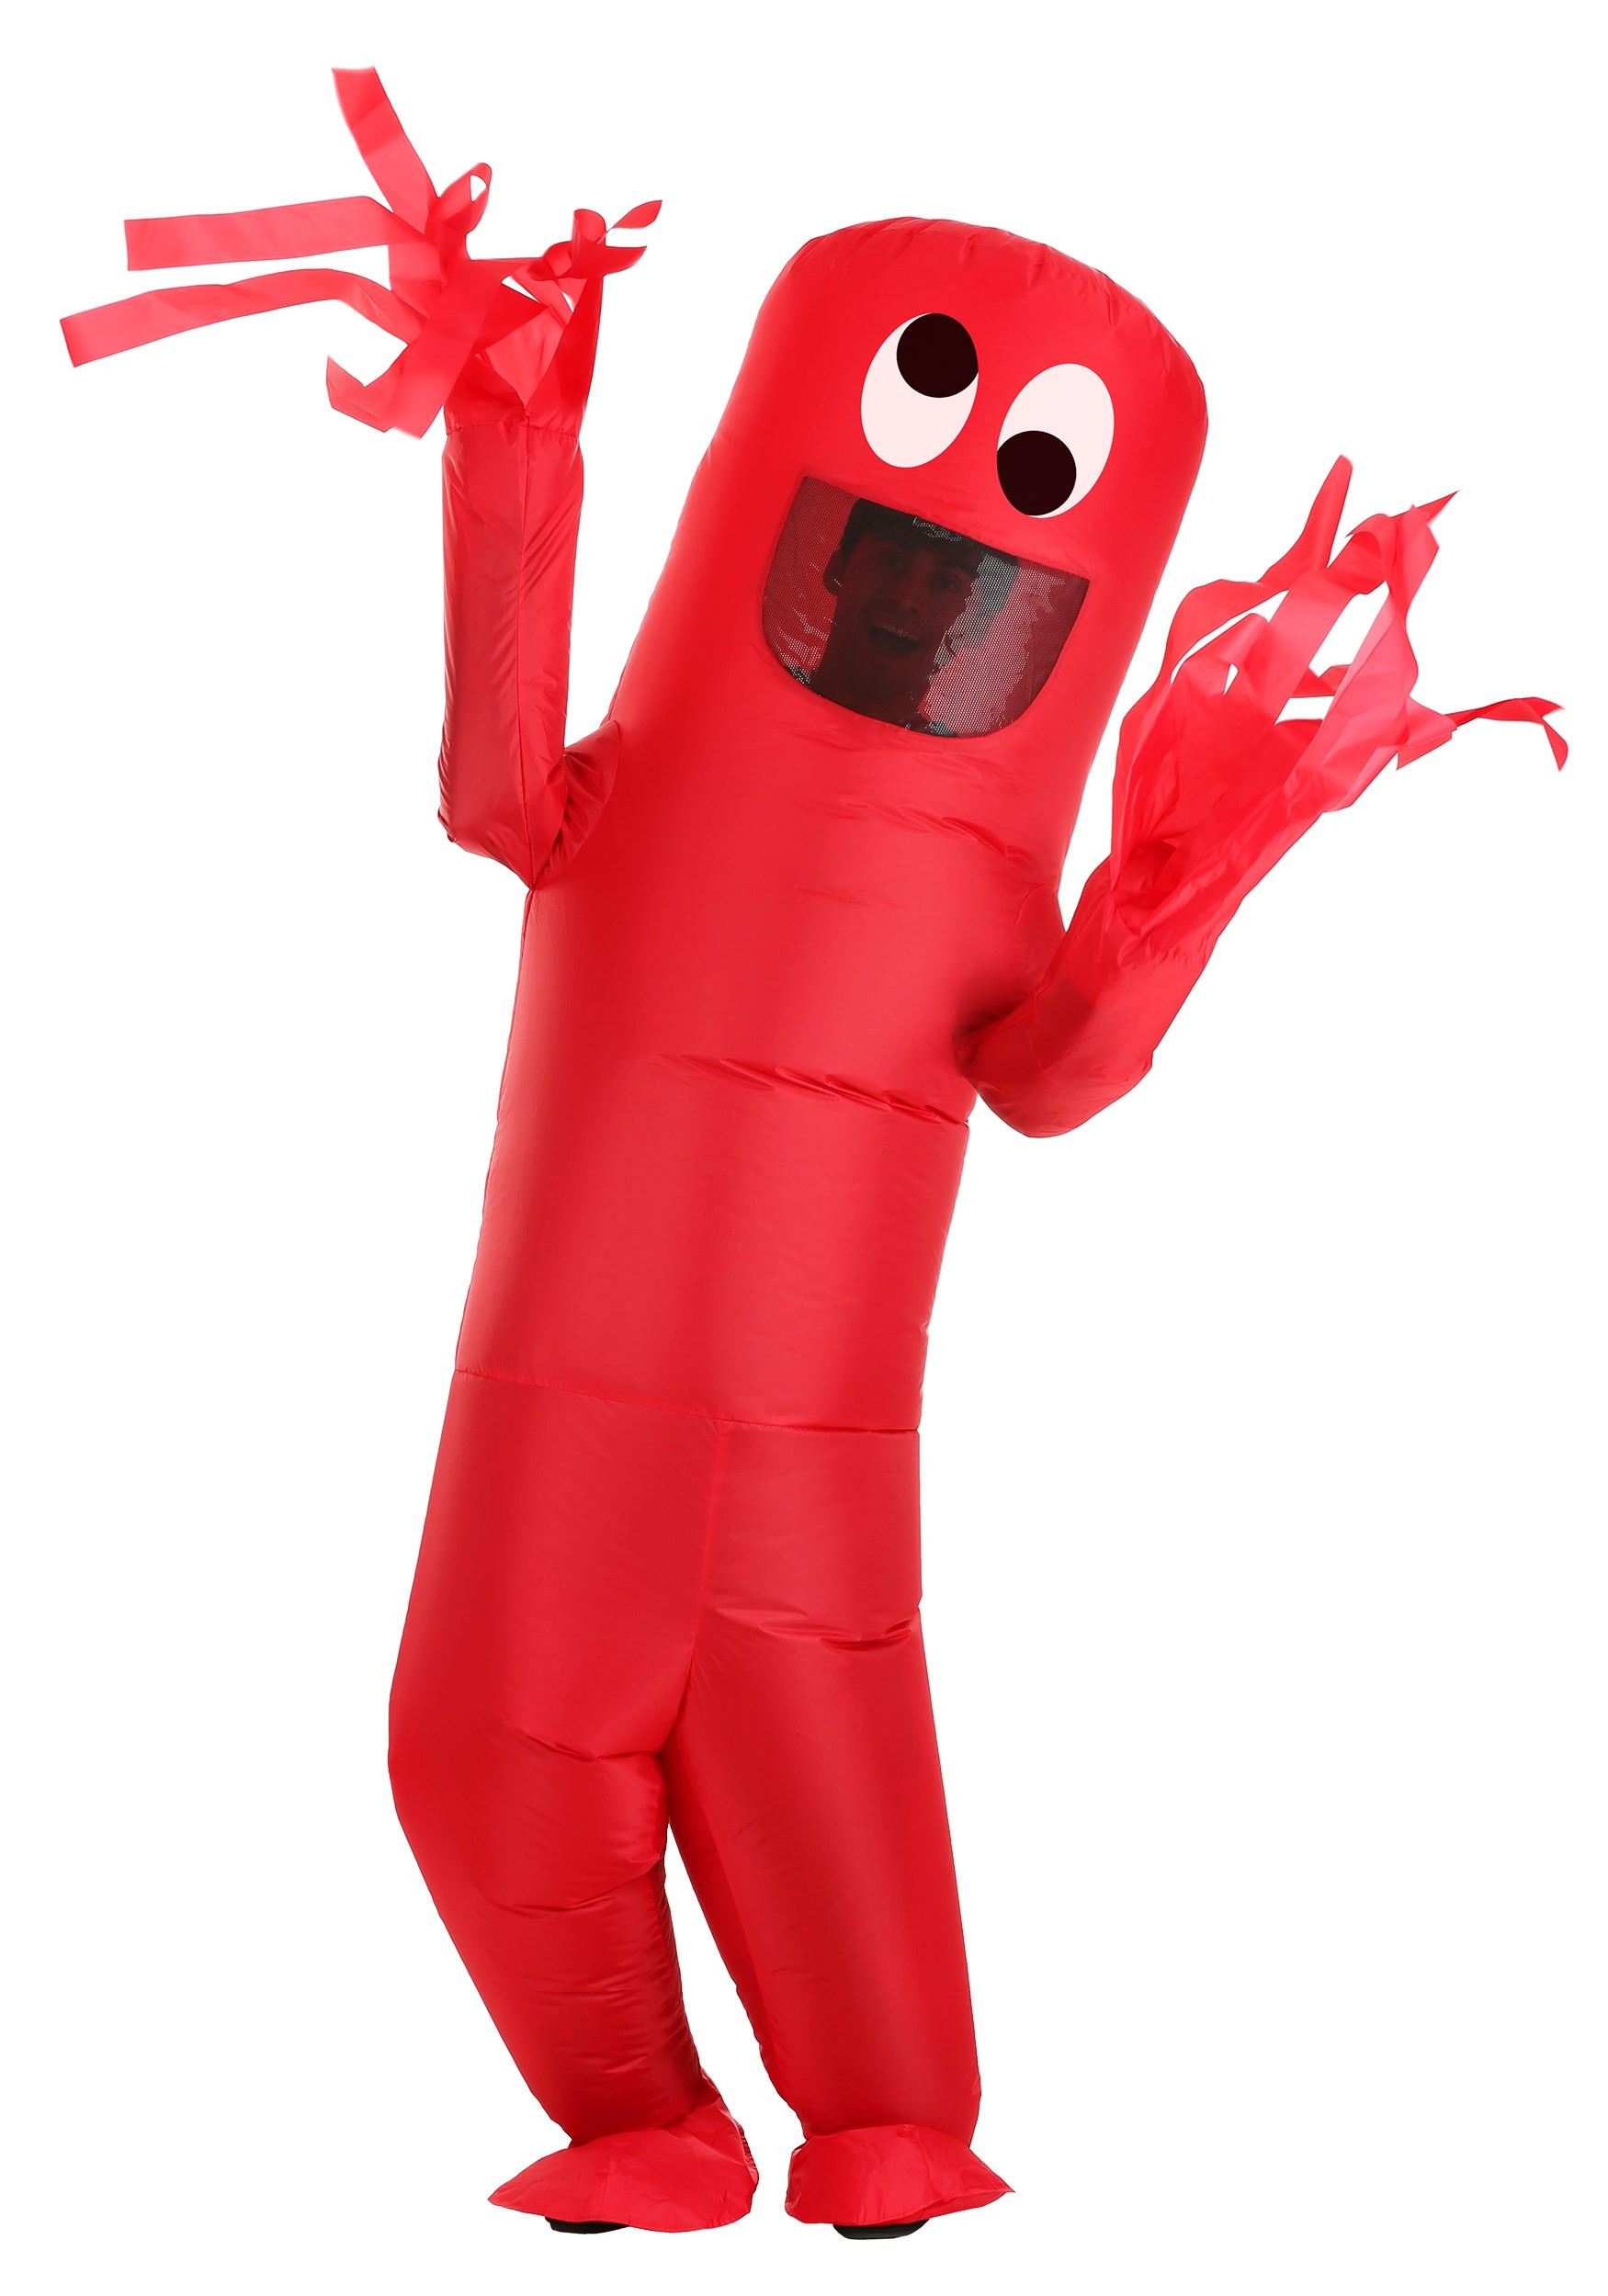 Wacky, Waving, Inflatable Tube Man Costume for Adult